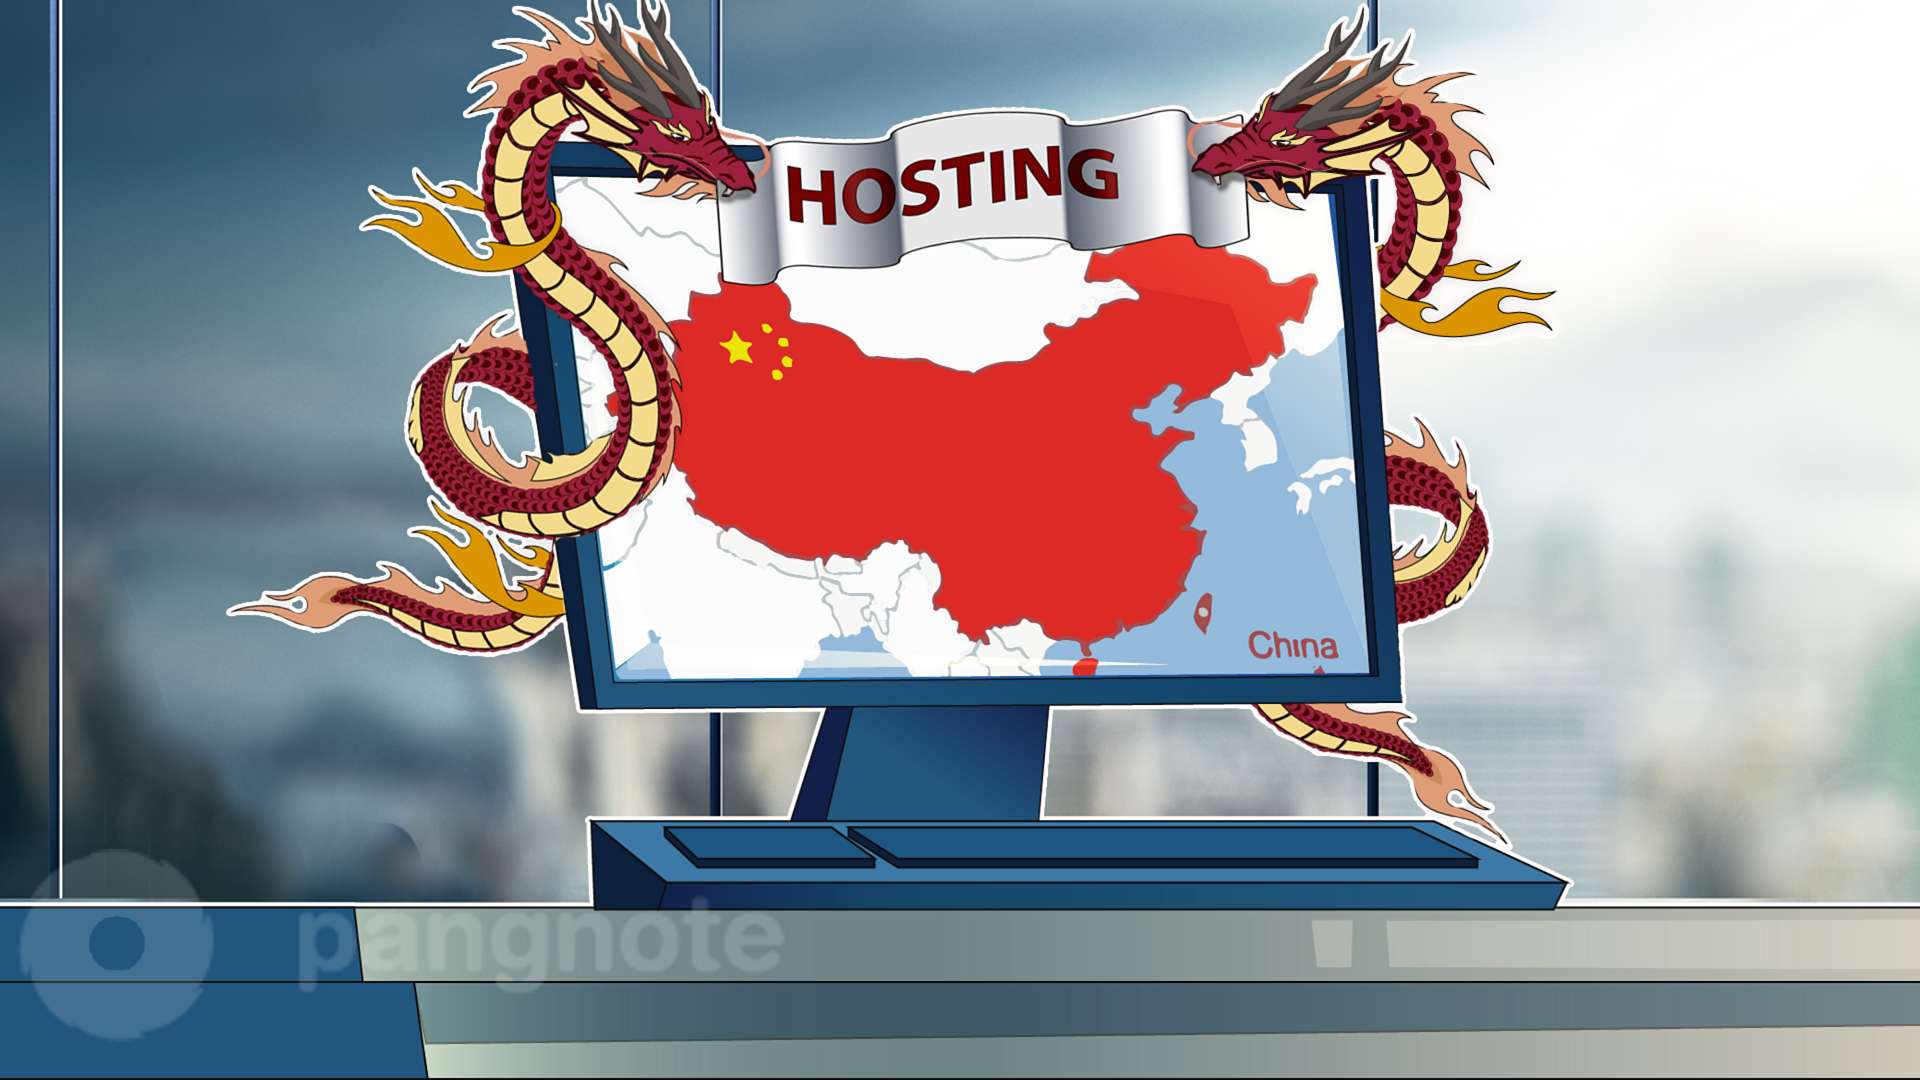 Features of Chinese Hosting